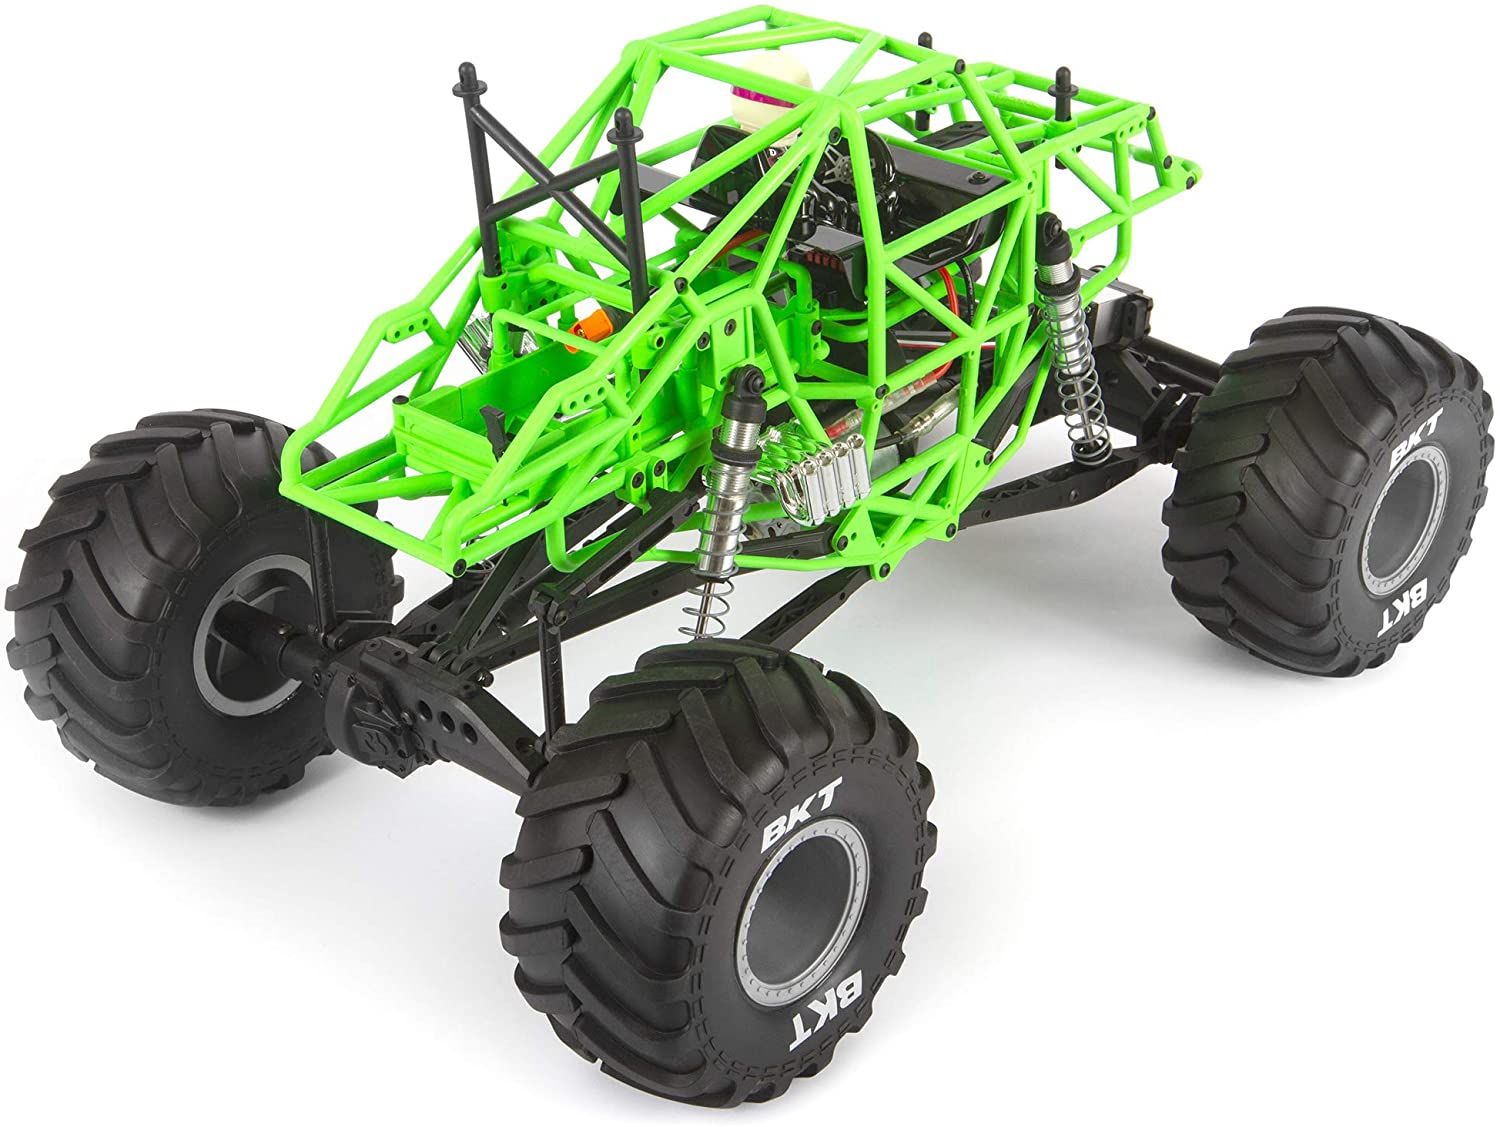 Axial Smt10 Grave Digger Monster Truck (Quality Pre Owned)